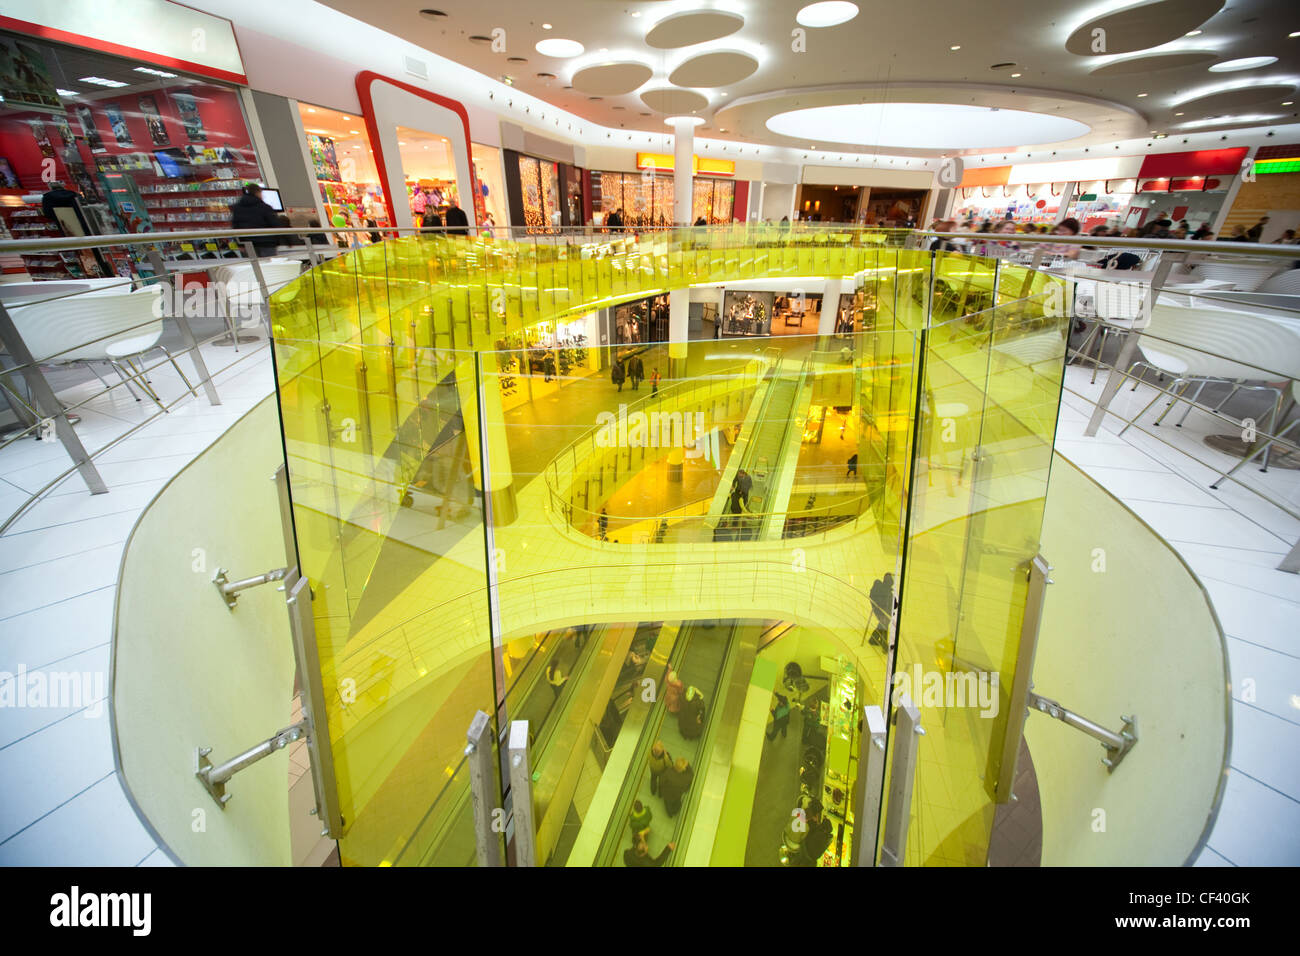 Escalator, stores, cafe, snackbar and many buyers and customers in shopping centre Stock Photo